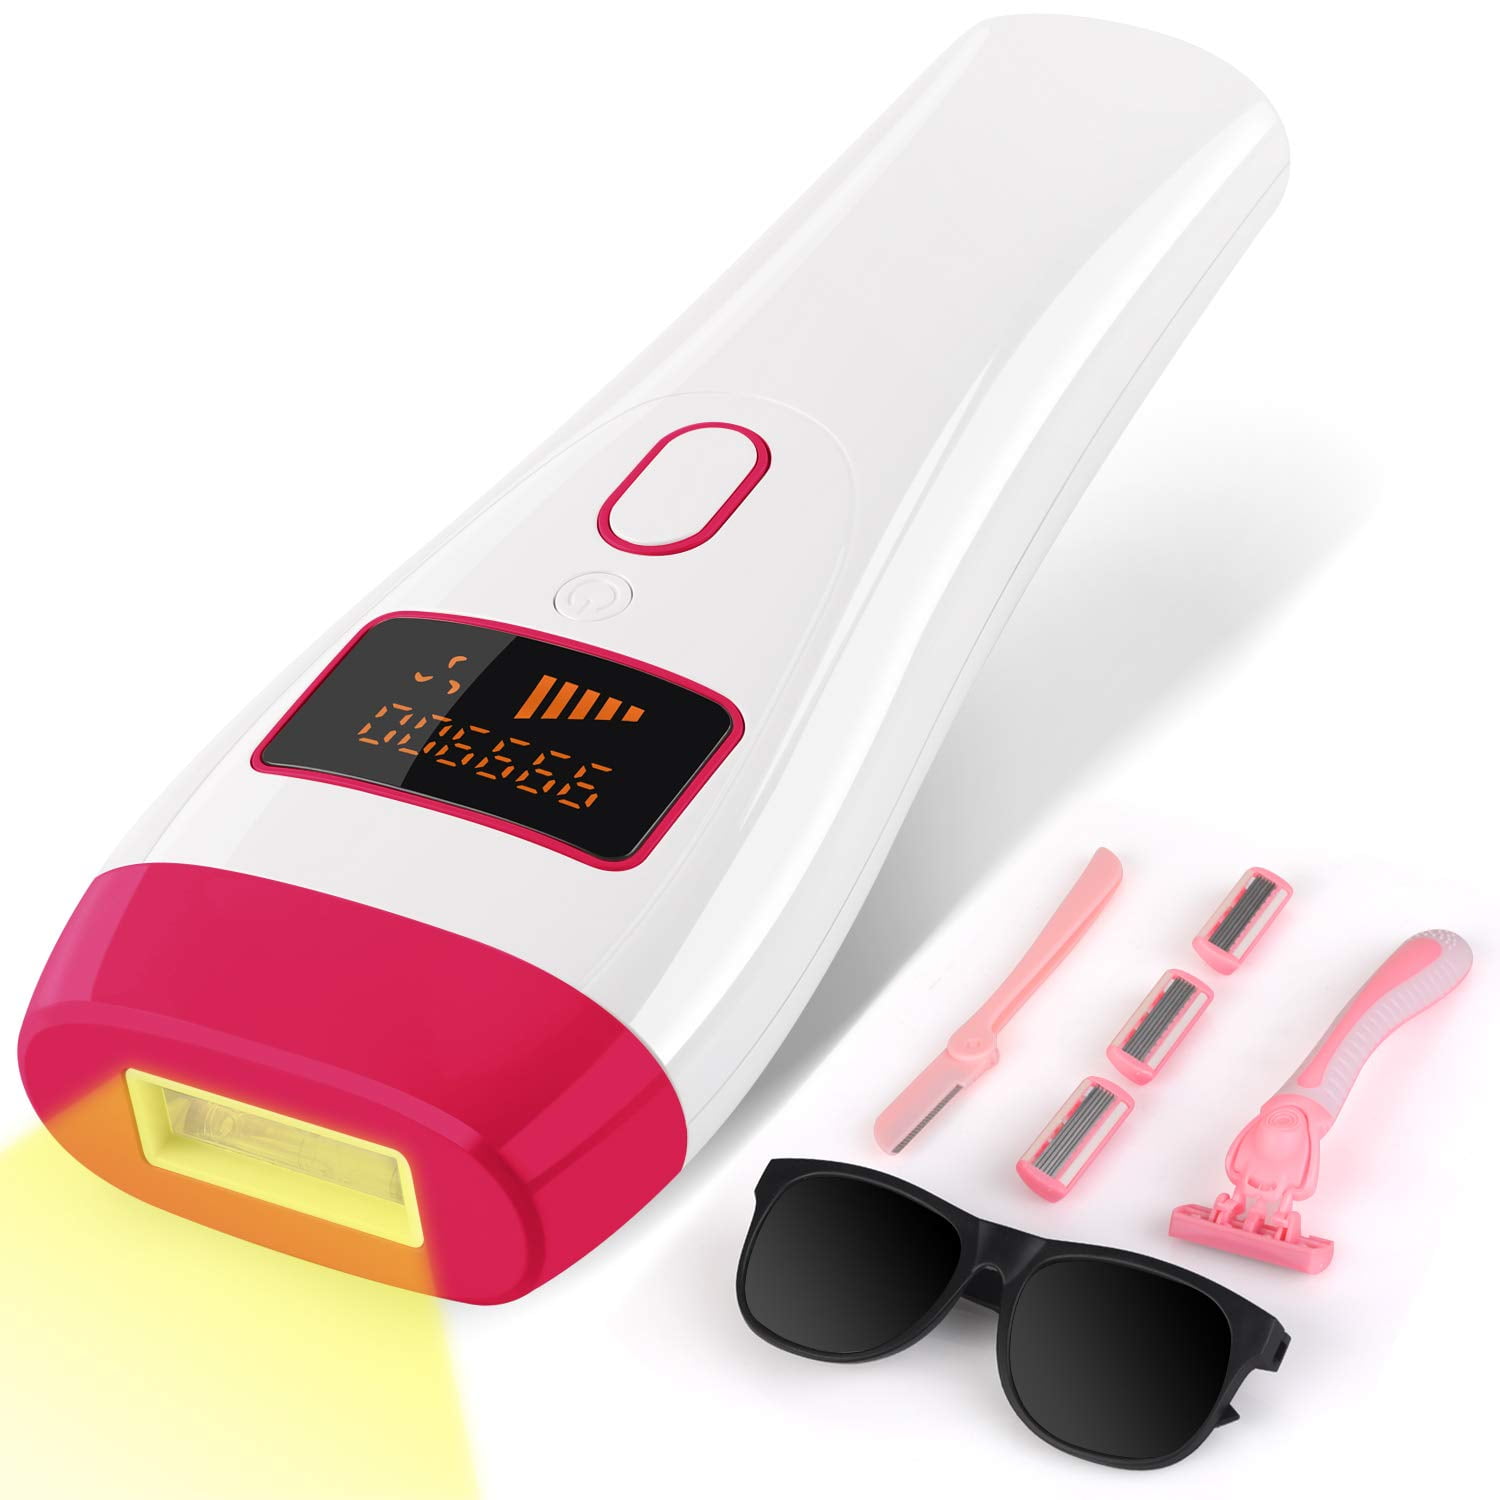 IPL Hair Removal for Women, SUMKUMY Permanent Hair Removal, Upgraded to  999,900 Flashes Painless Facial Hair Removal Device for Whole Body on  Armpits Back Legs Arms Face Bikini Line - Walmart.com